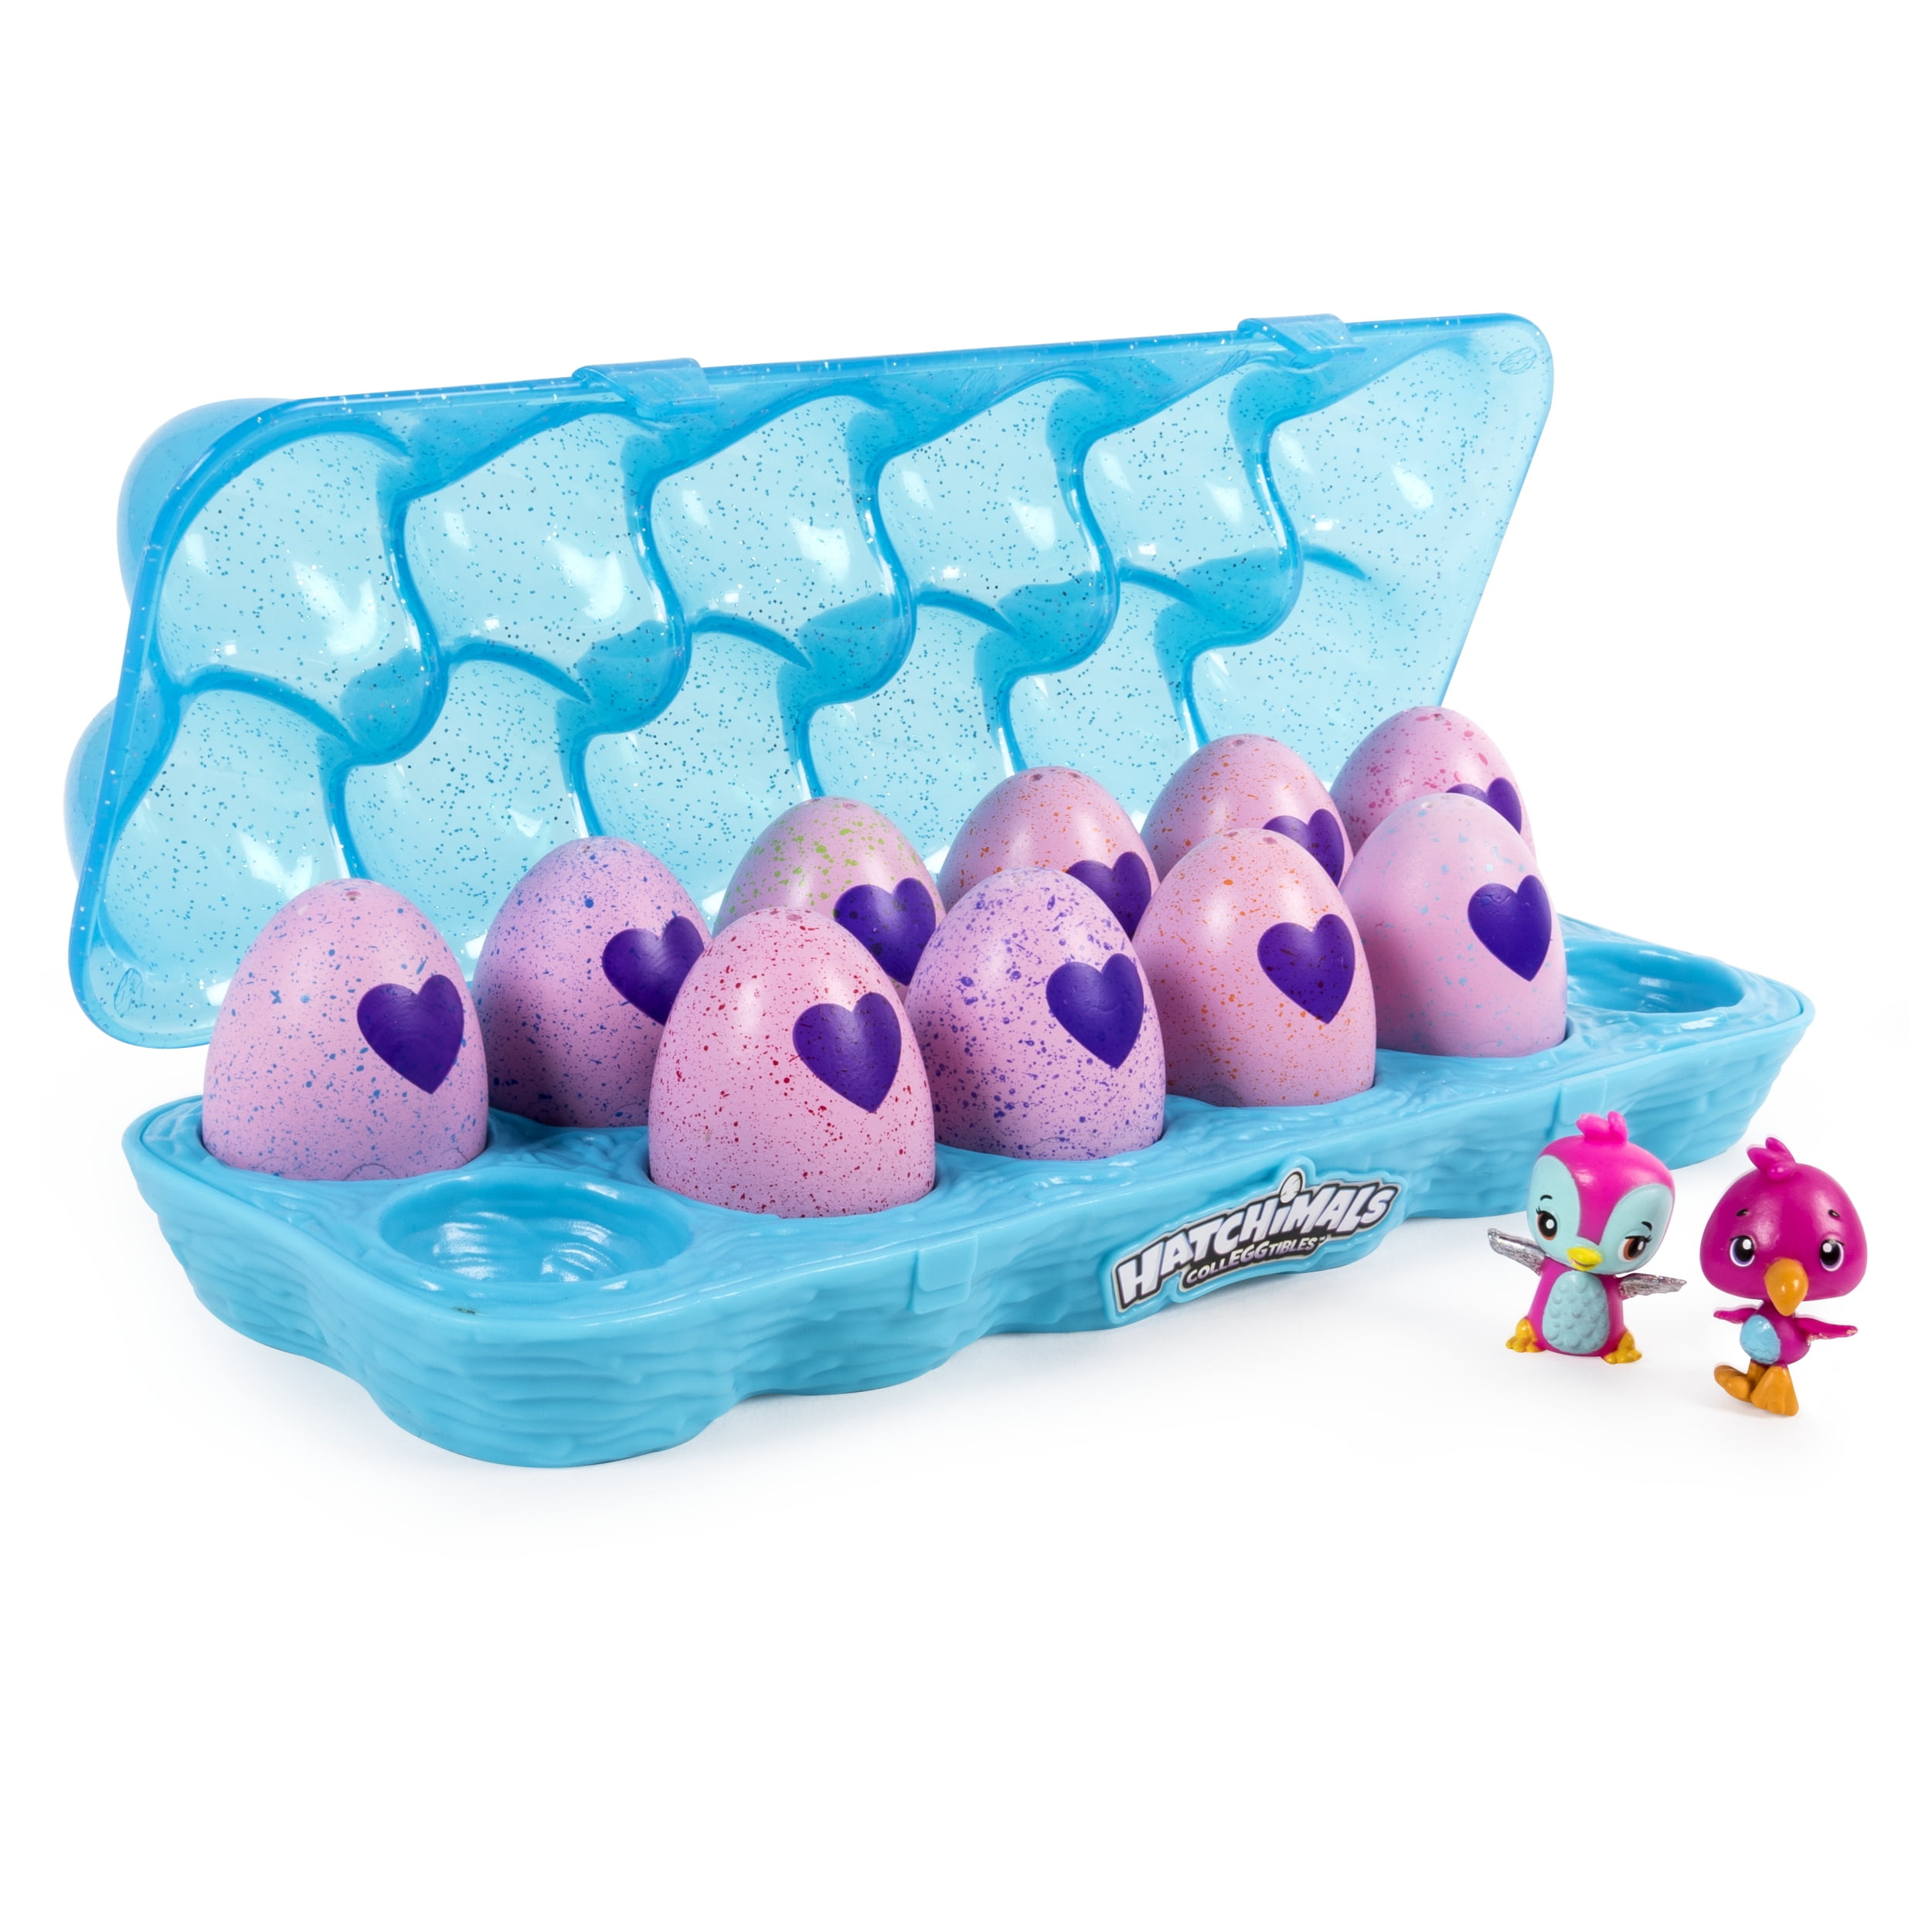 Hatchimals 6044069 HatchiBabies Ponette Hatching Egg with Interactive Toy for sale online 